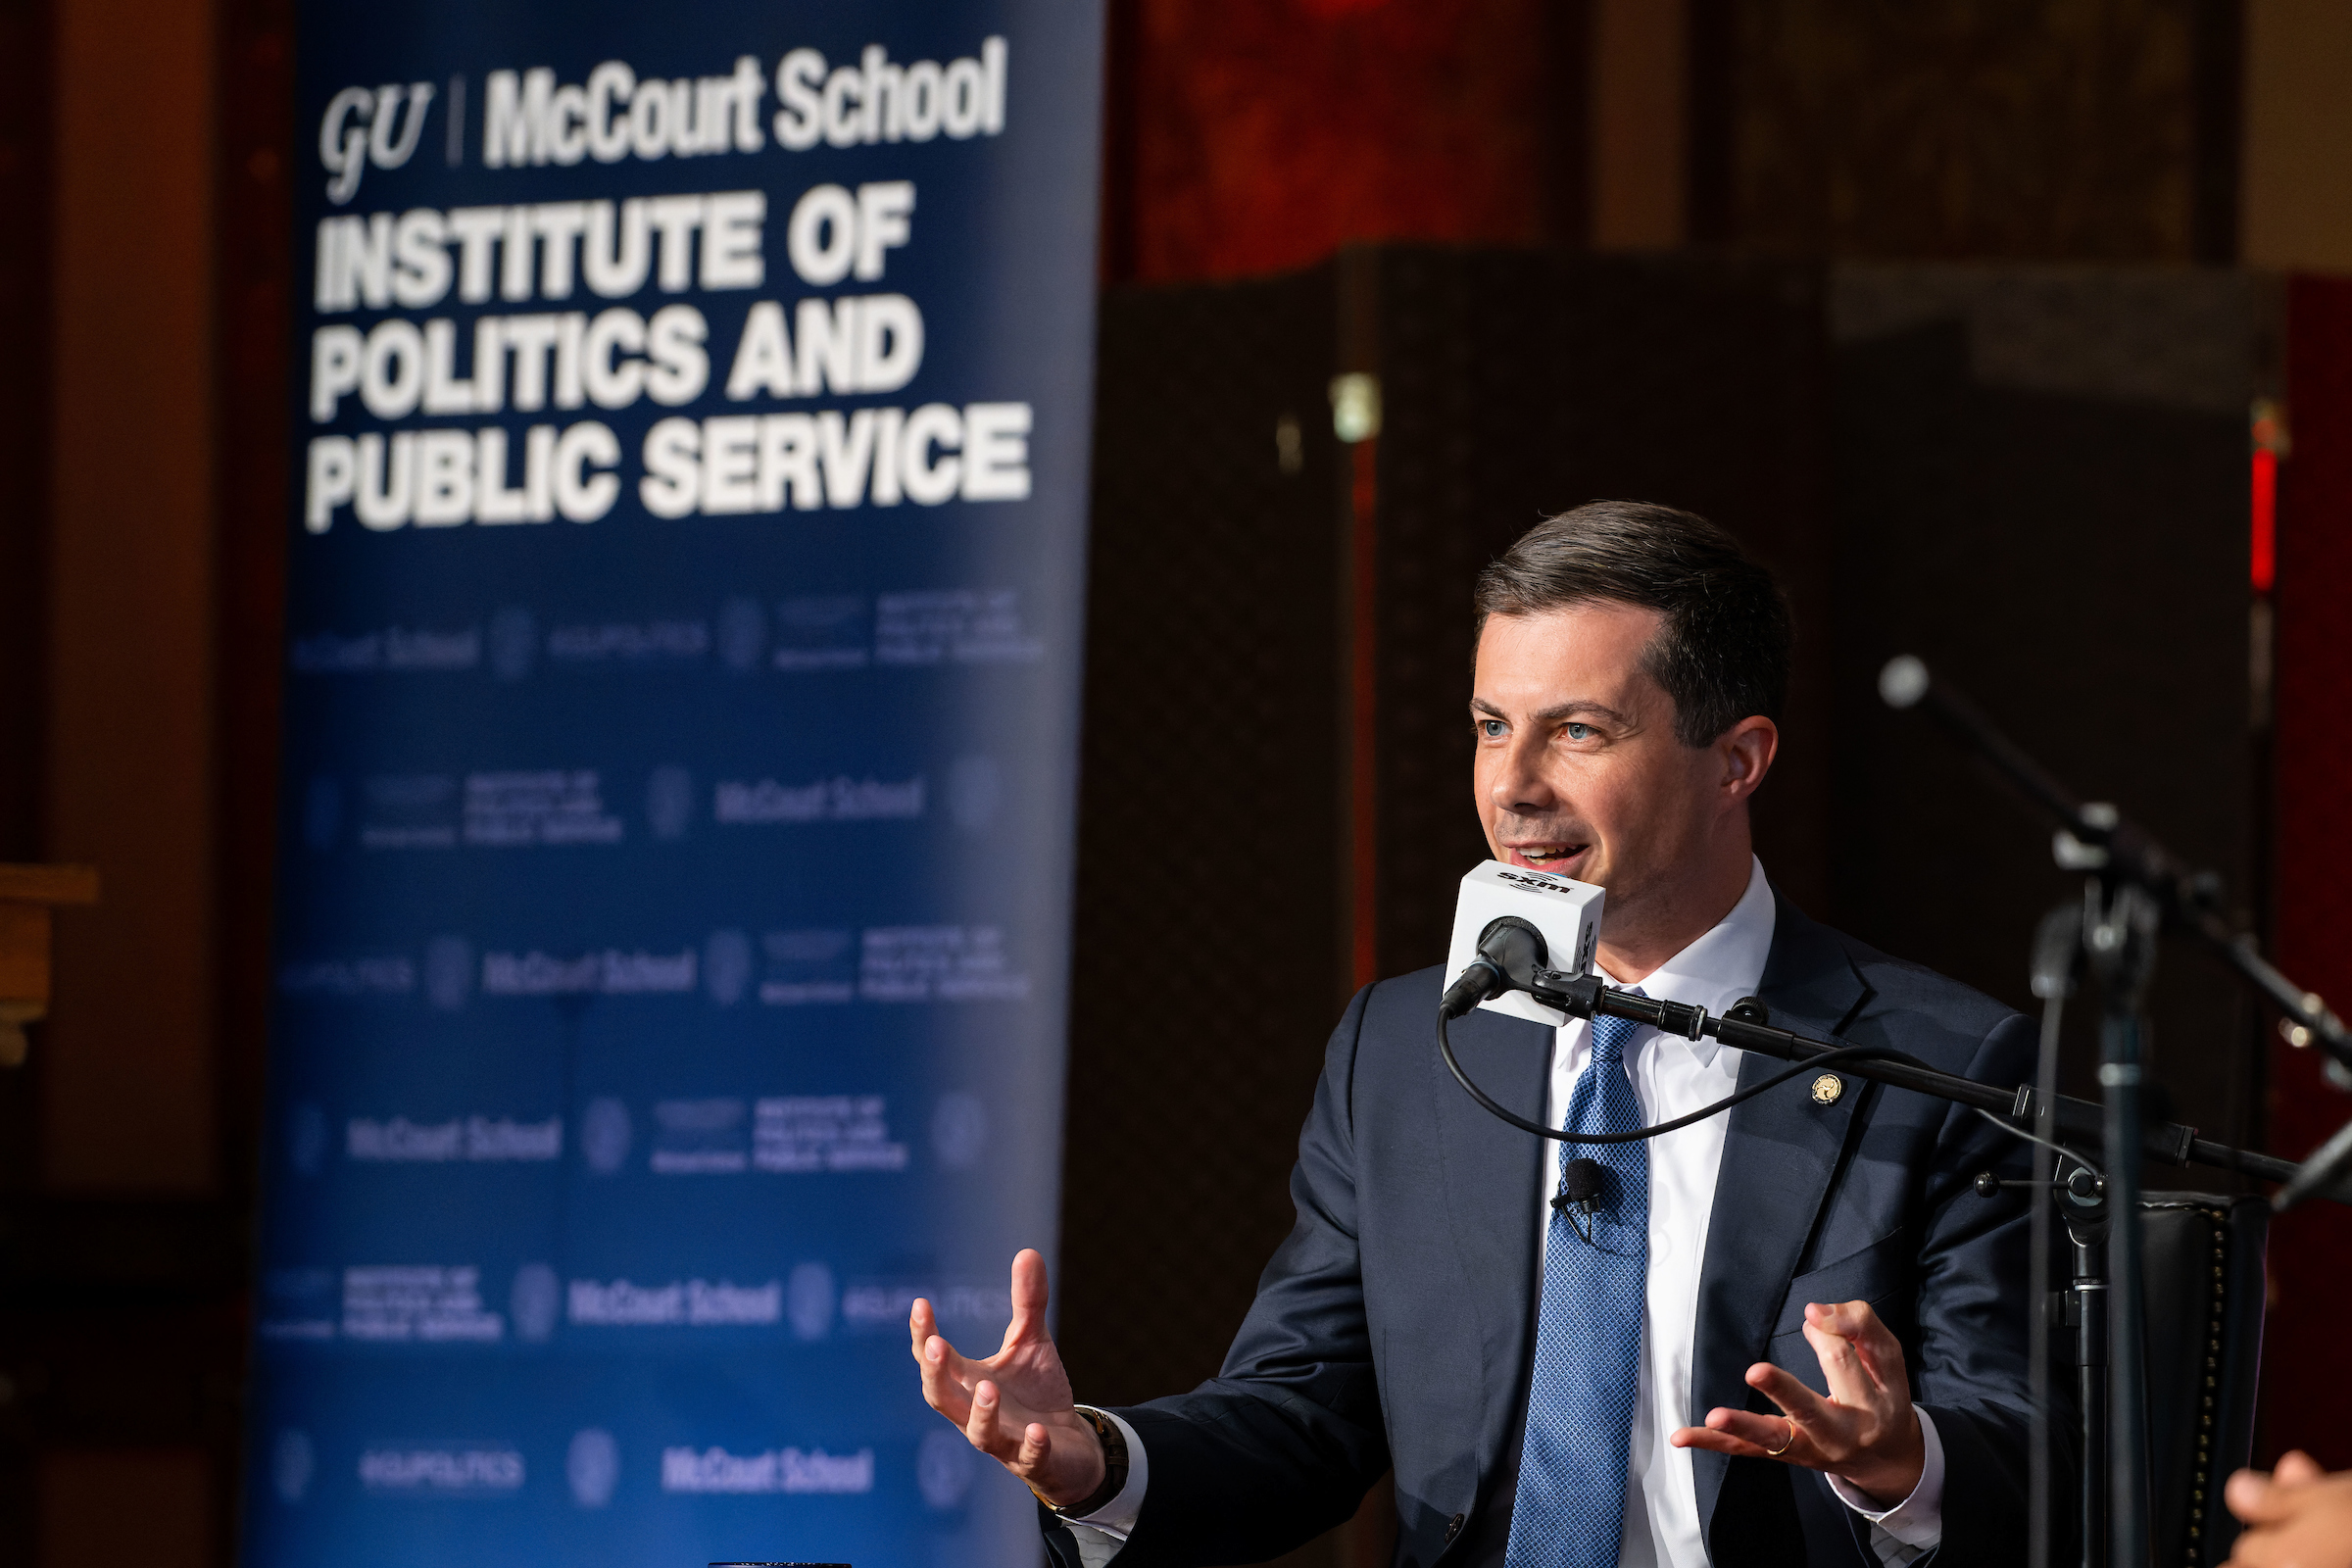 Pete Buttigieg talks into a microphone while seated onstage in front of a McCourt School Institute of Politics and Public Service sign